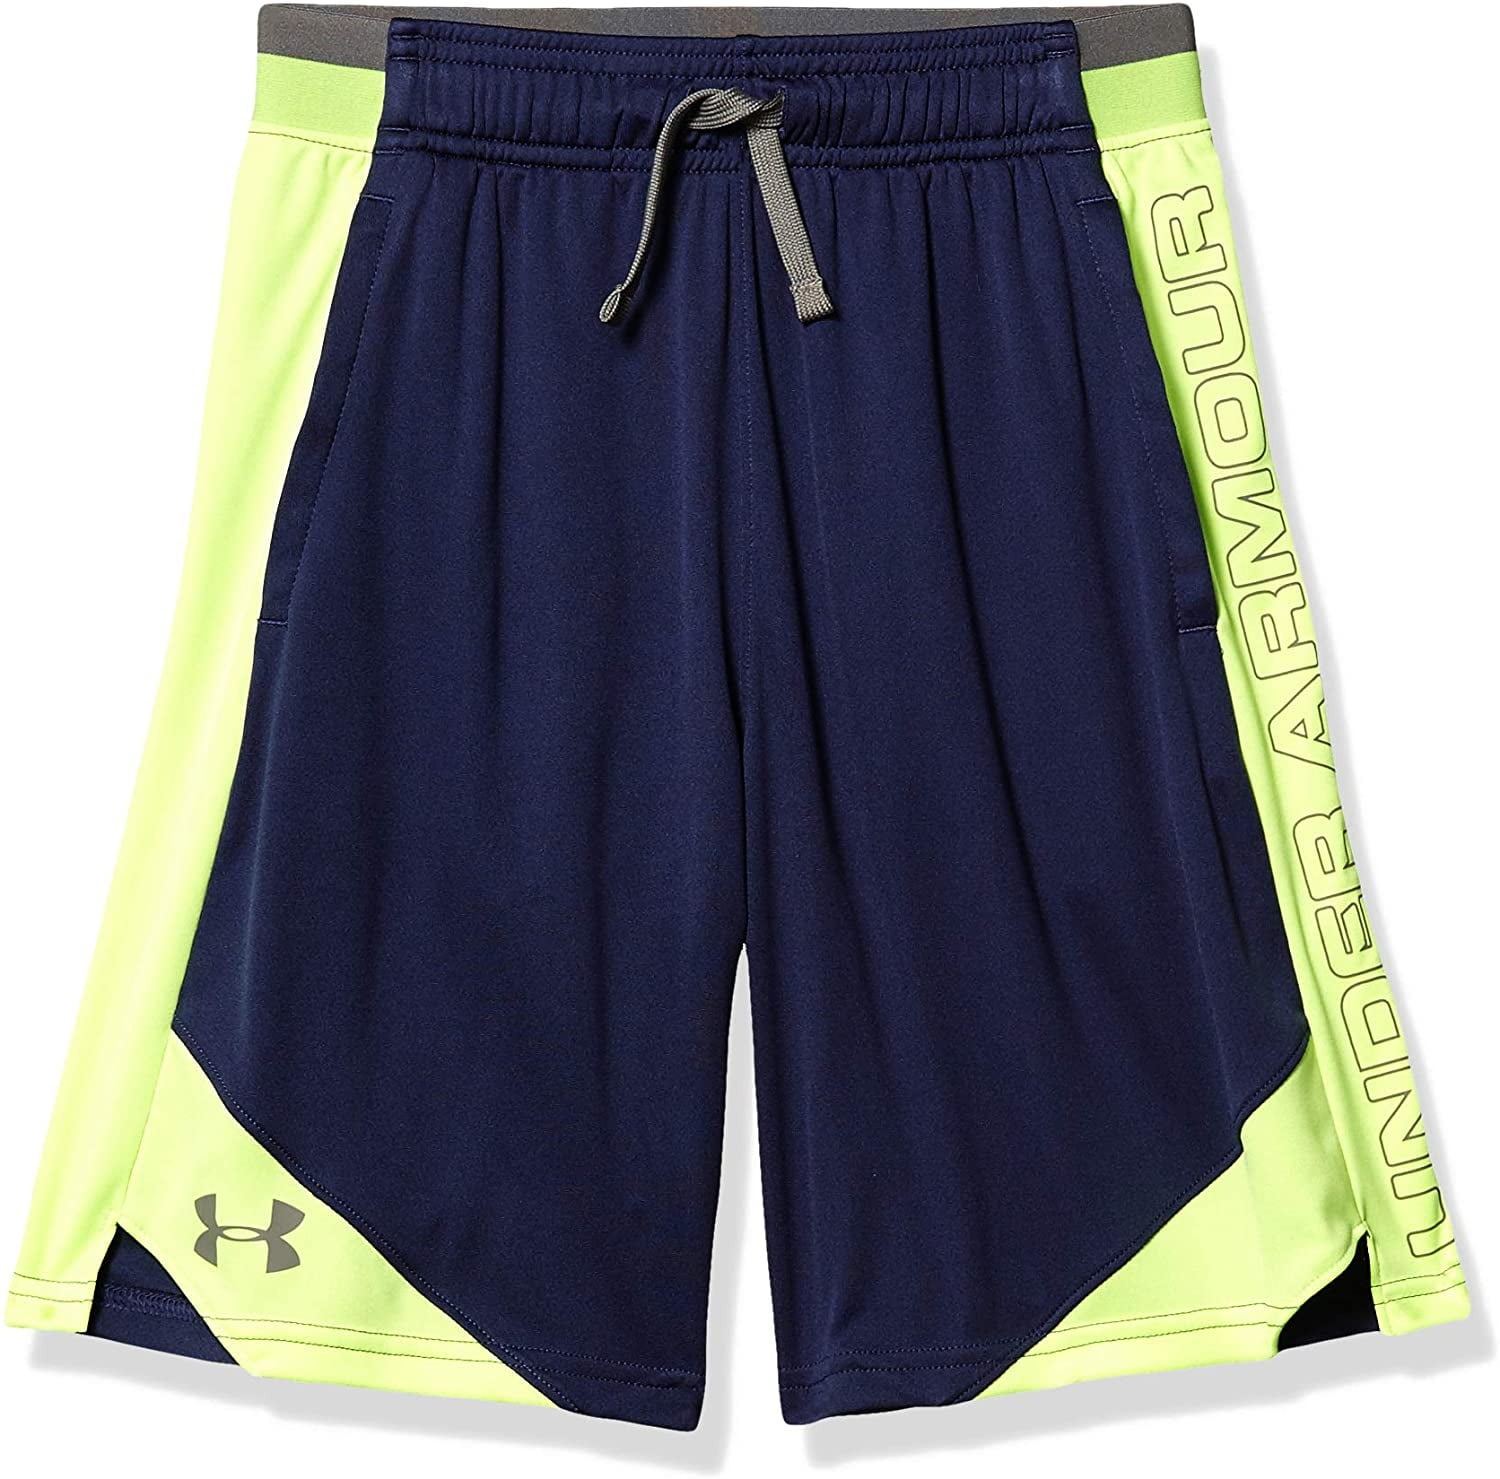 15 Incredible Under Armour Workout Shorts For 2023